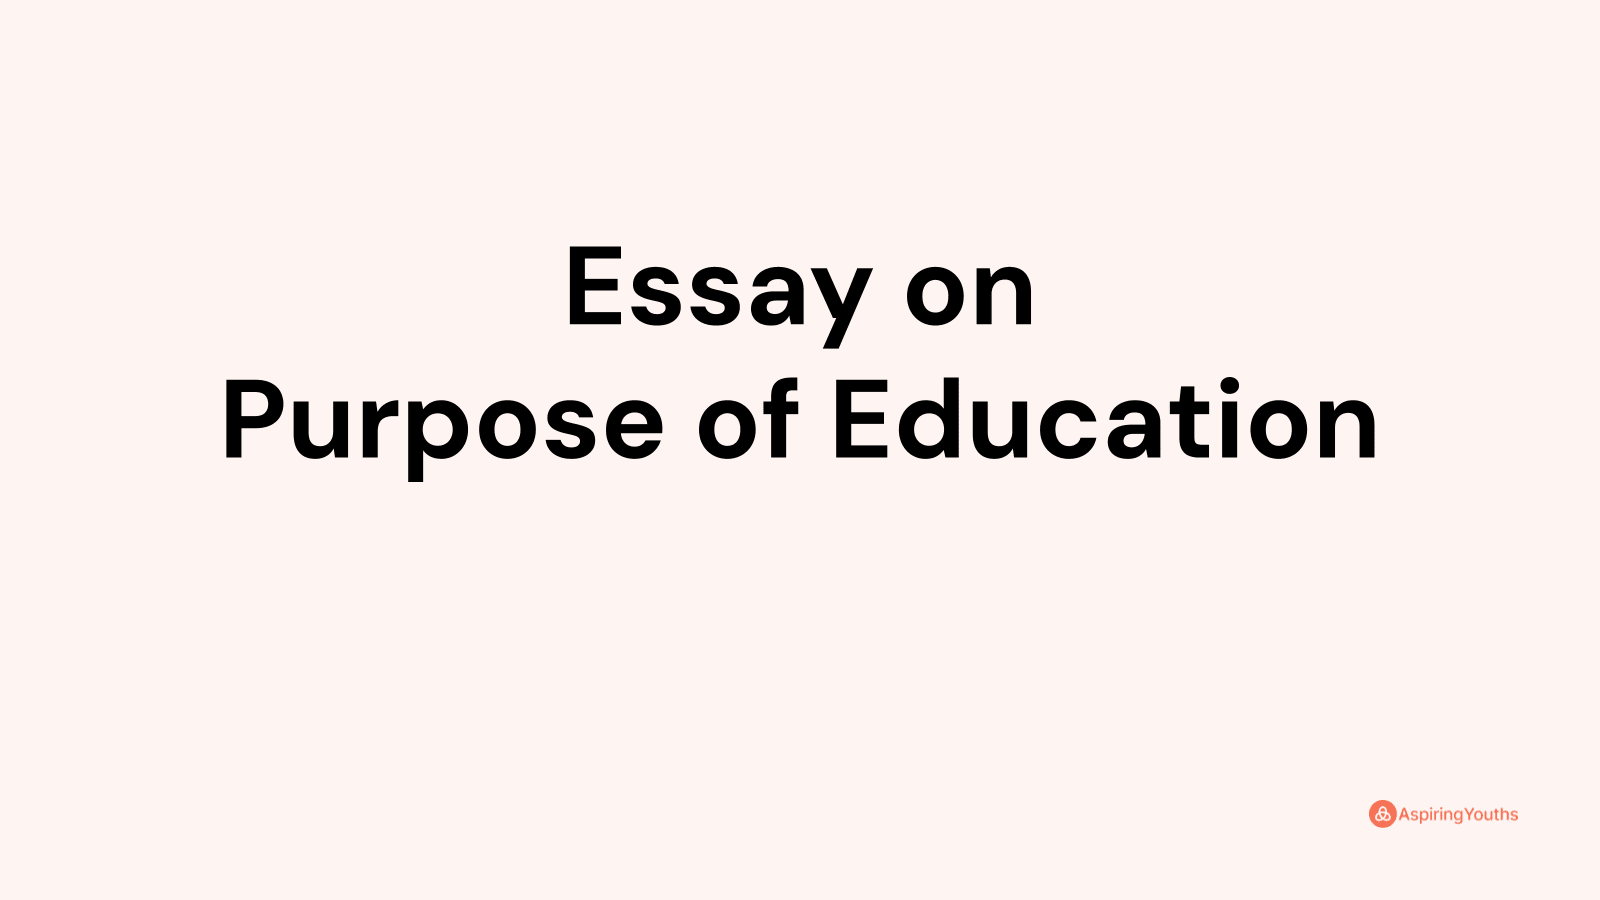 write an article about the purpose of education